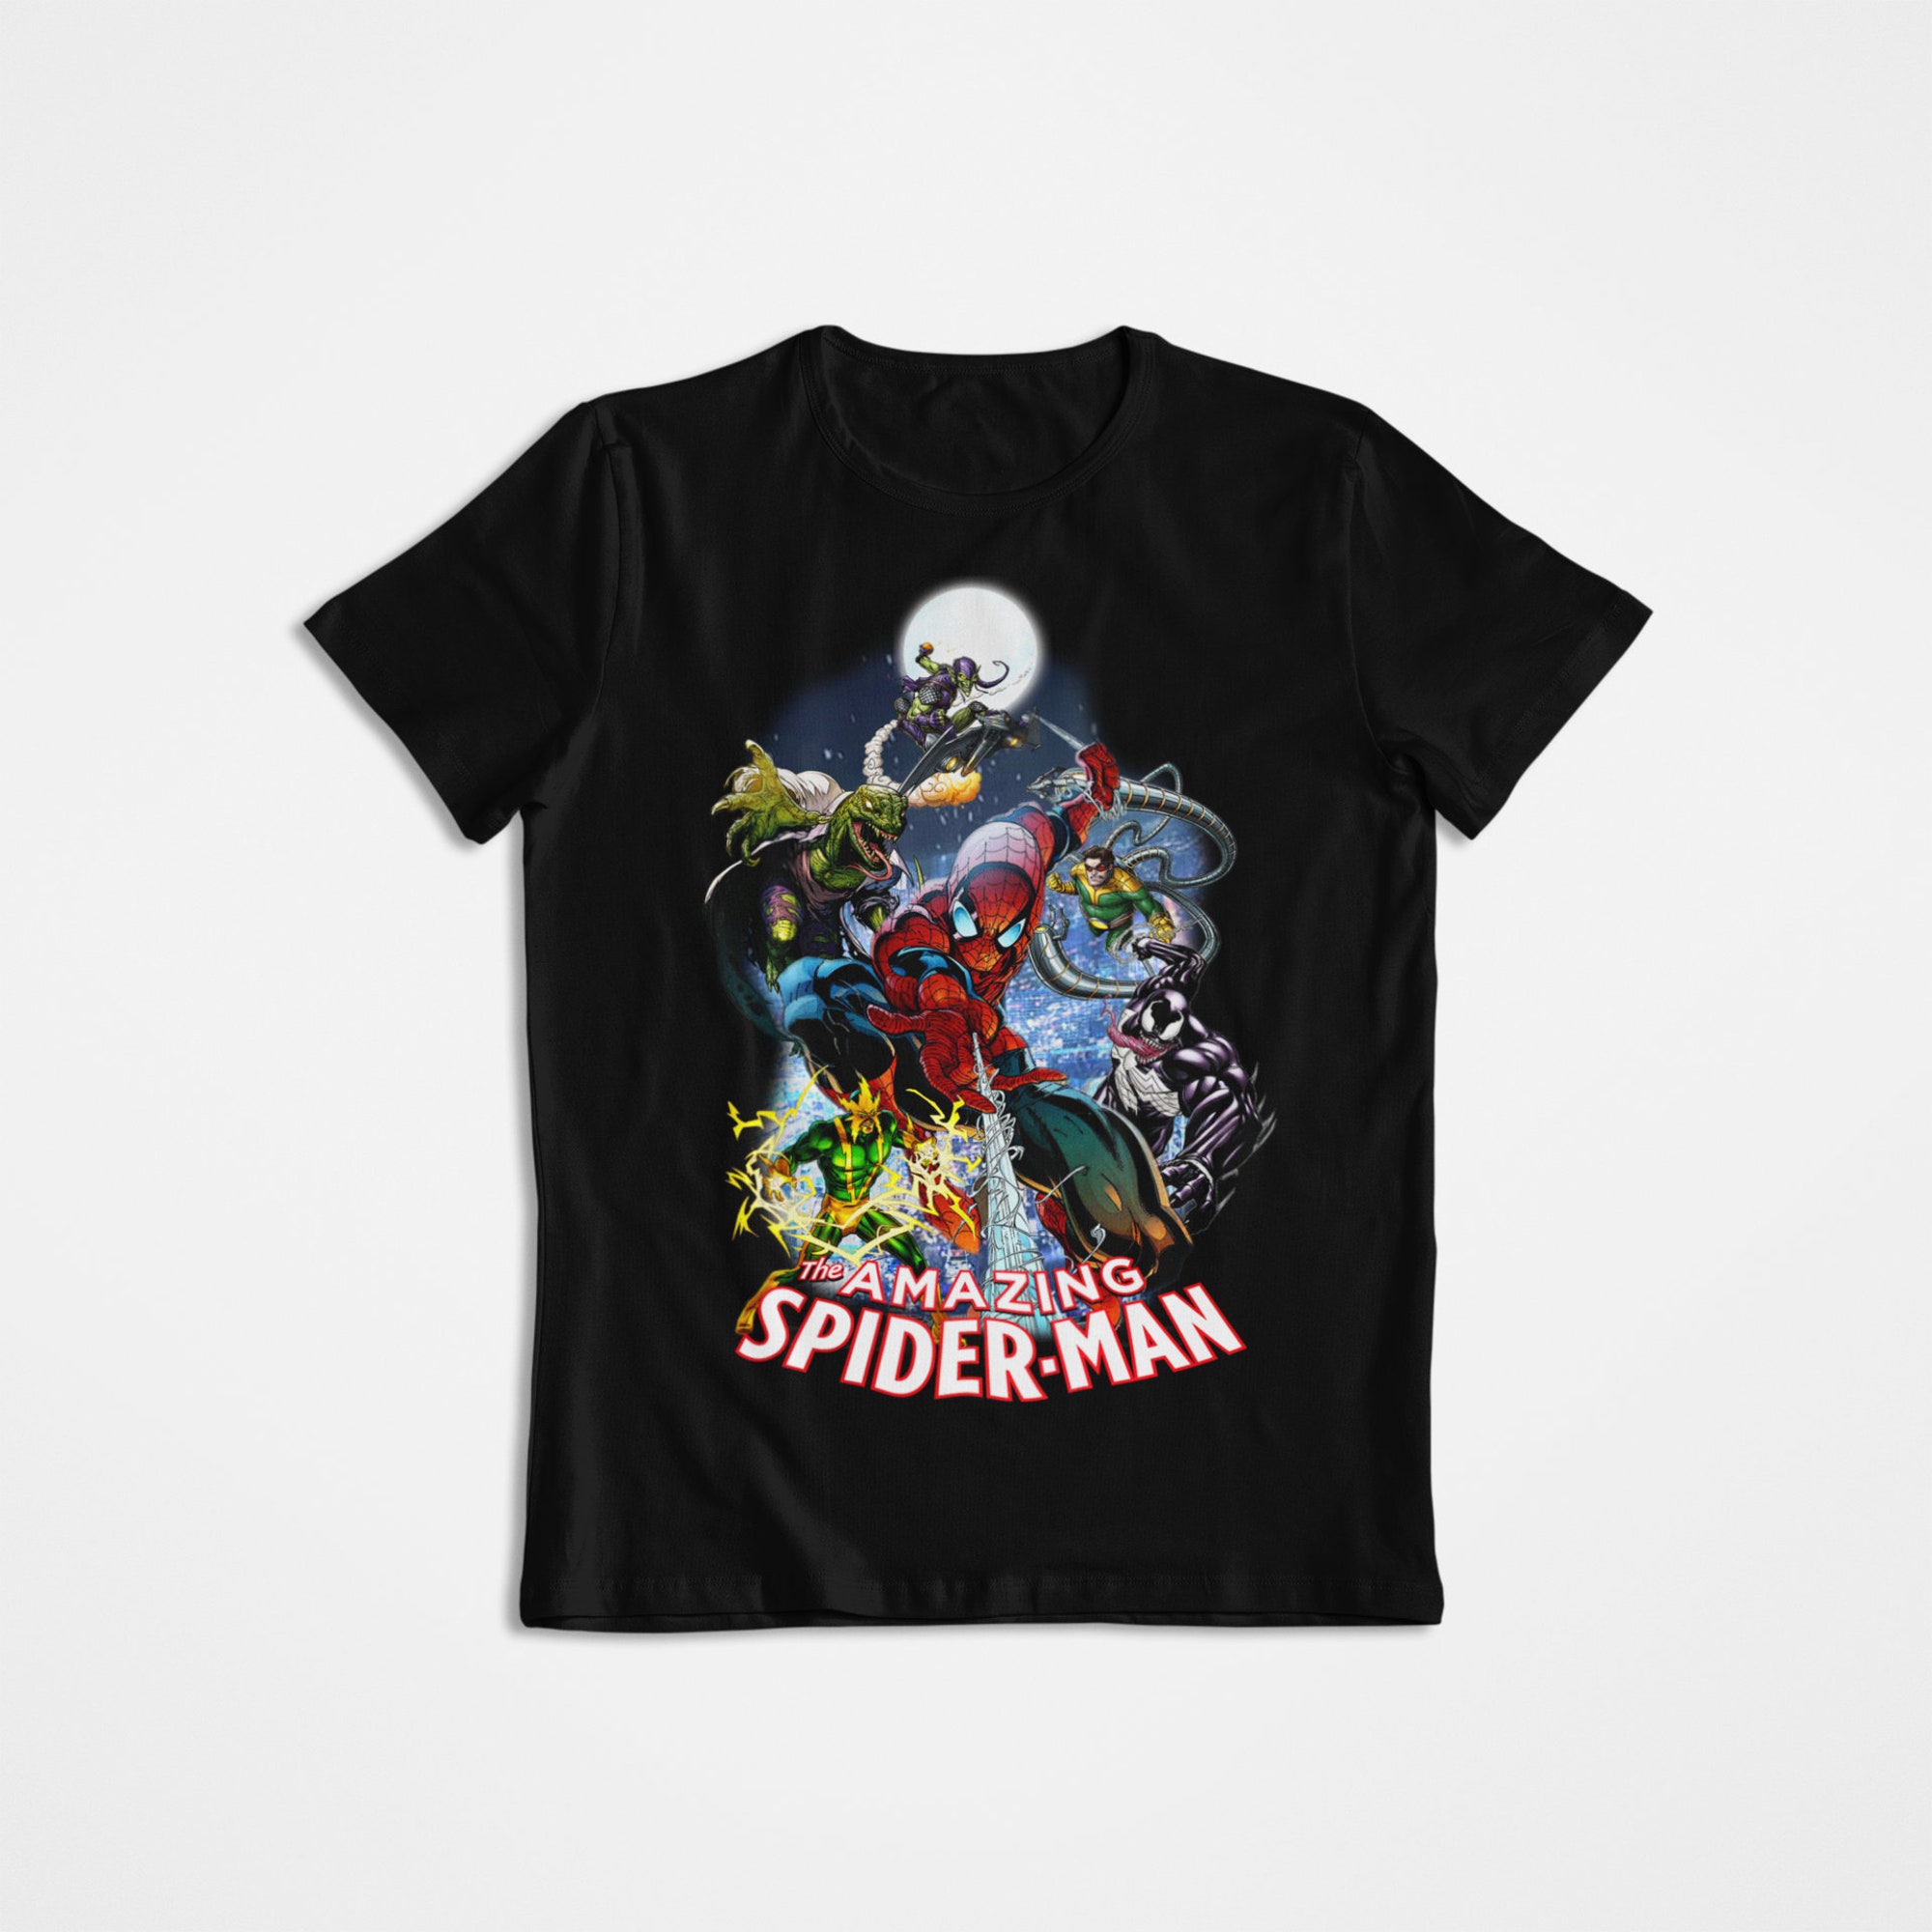 Discover Vintage Graphic T-Shirt, Graphic Tee ~ The Amazing Spider-Man, Marvel, Comic